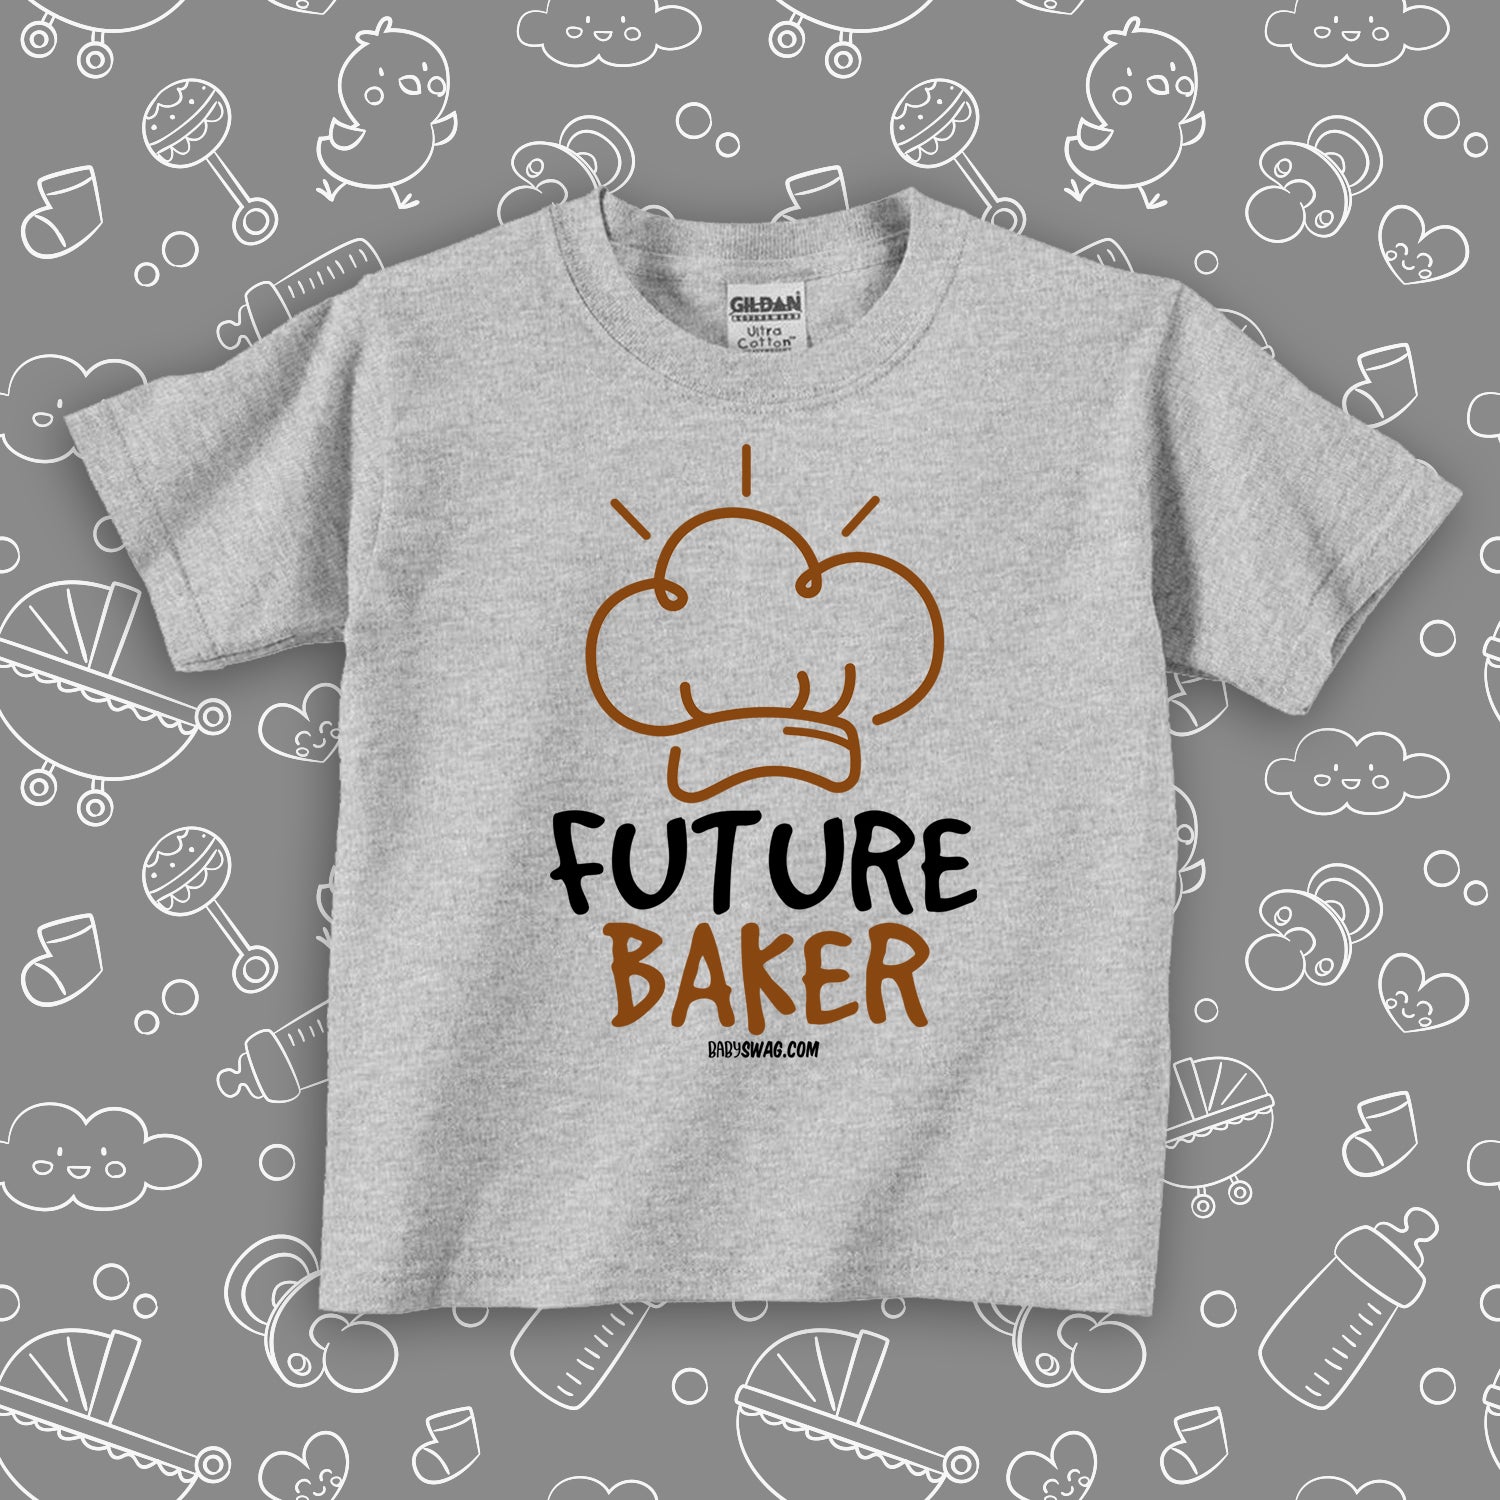 Grey toddler shirt with "Future baker" print and a drawing of baker's hat.